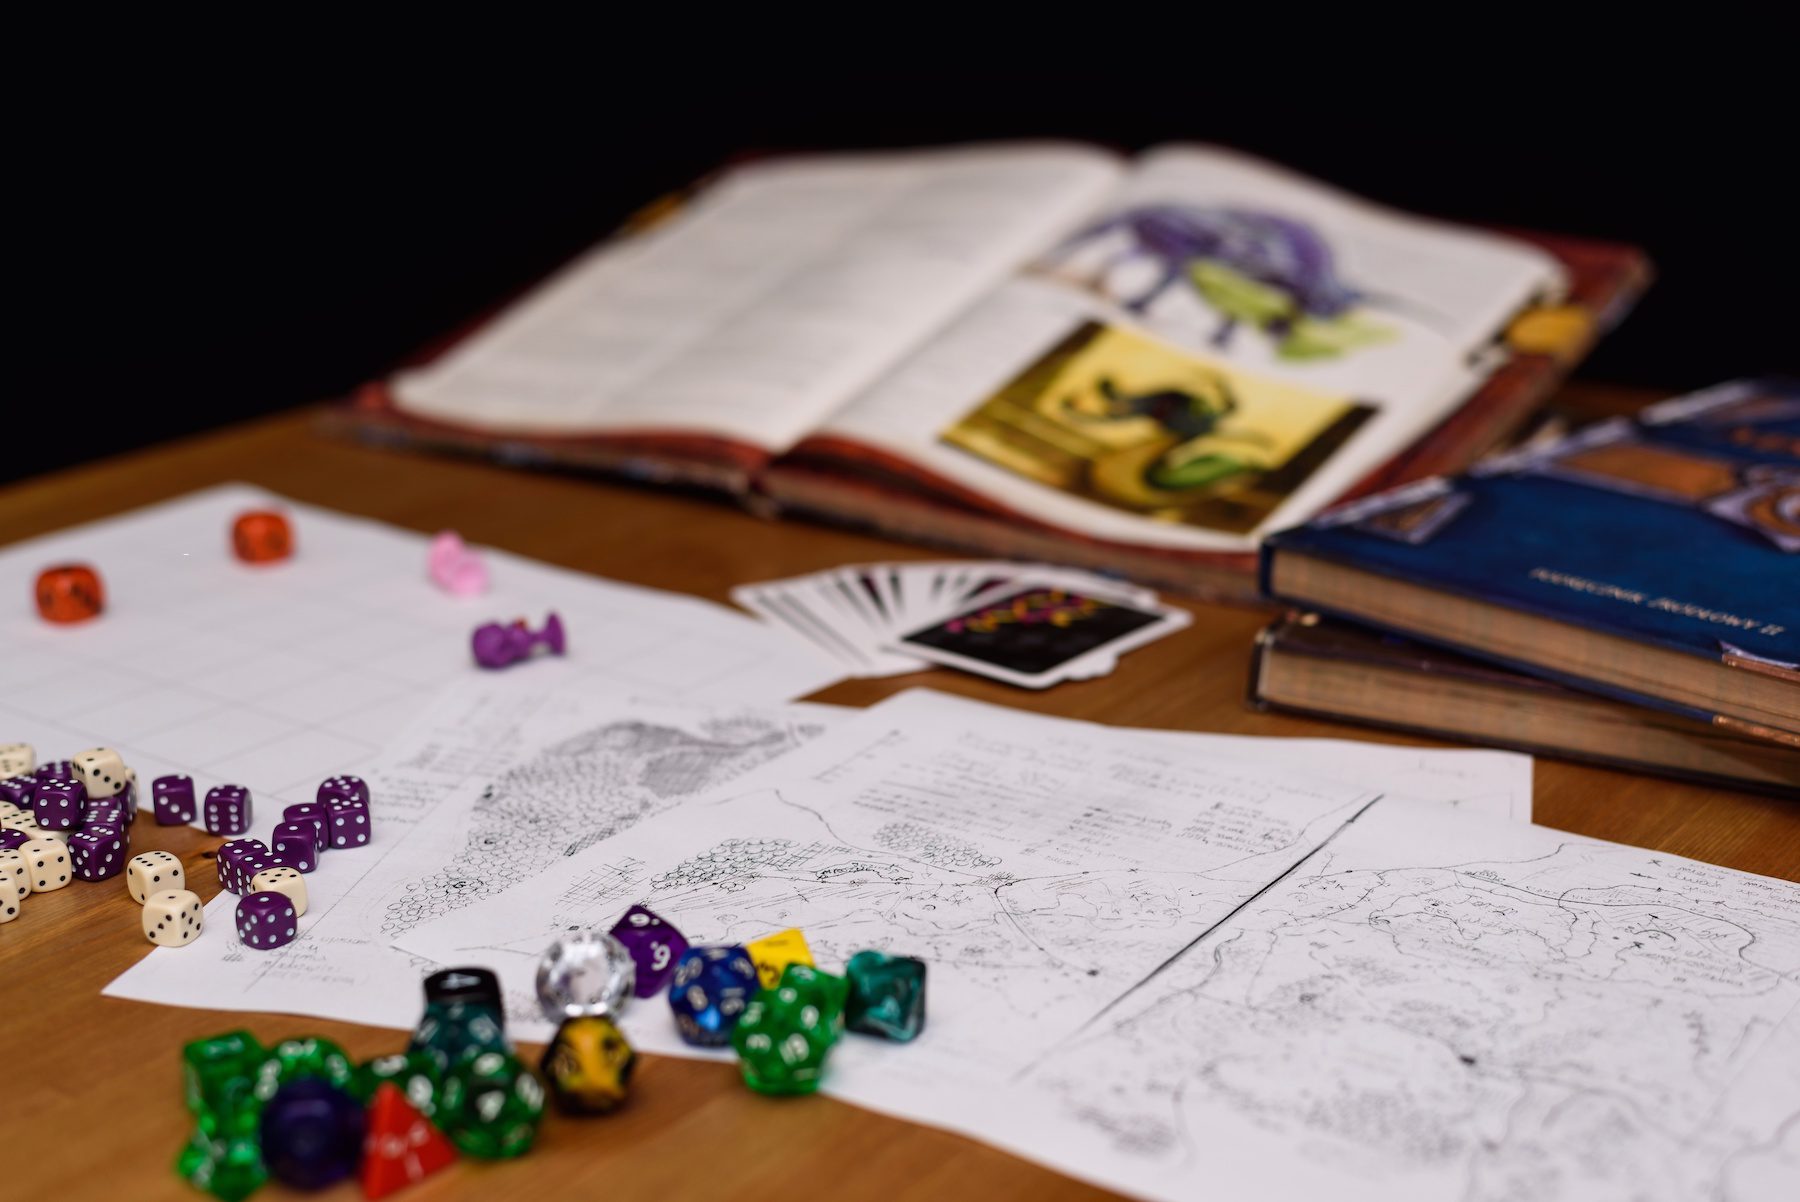 Various dice such as D20 as well as normal 6-sided dice, are laid across sheets of paper outlining a quest for dungeons and dragons. 